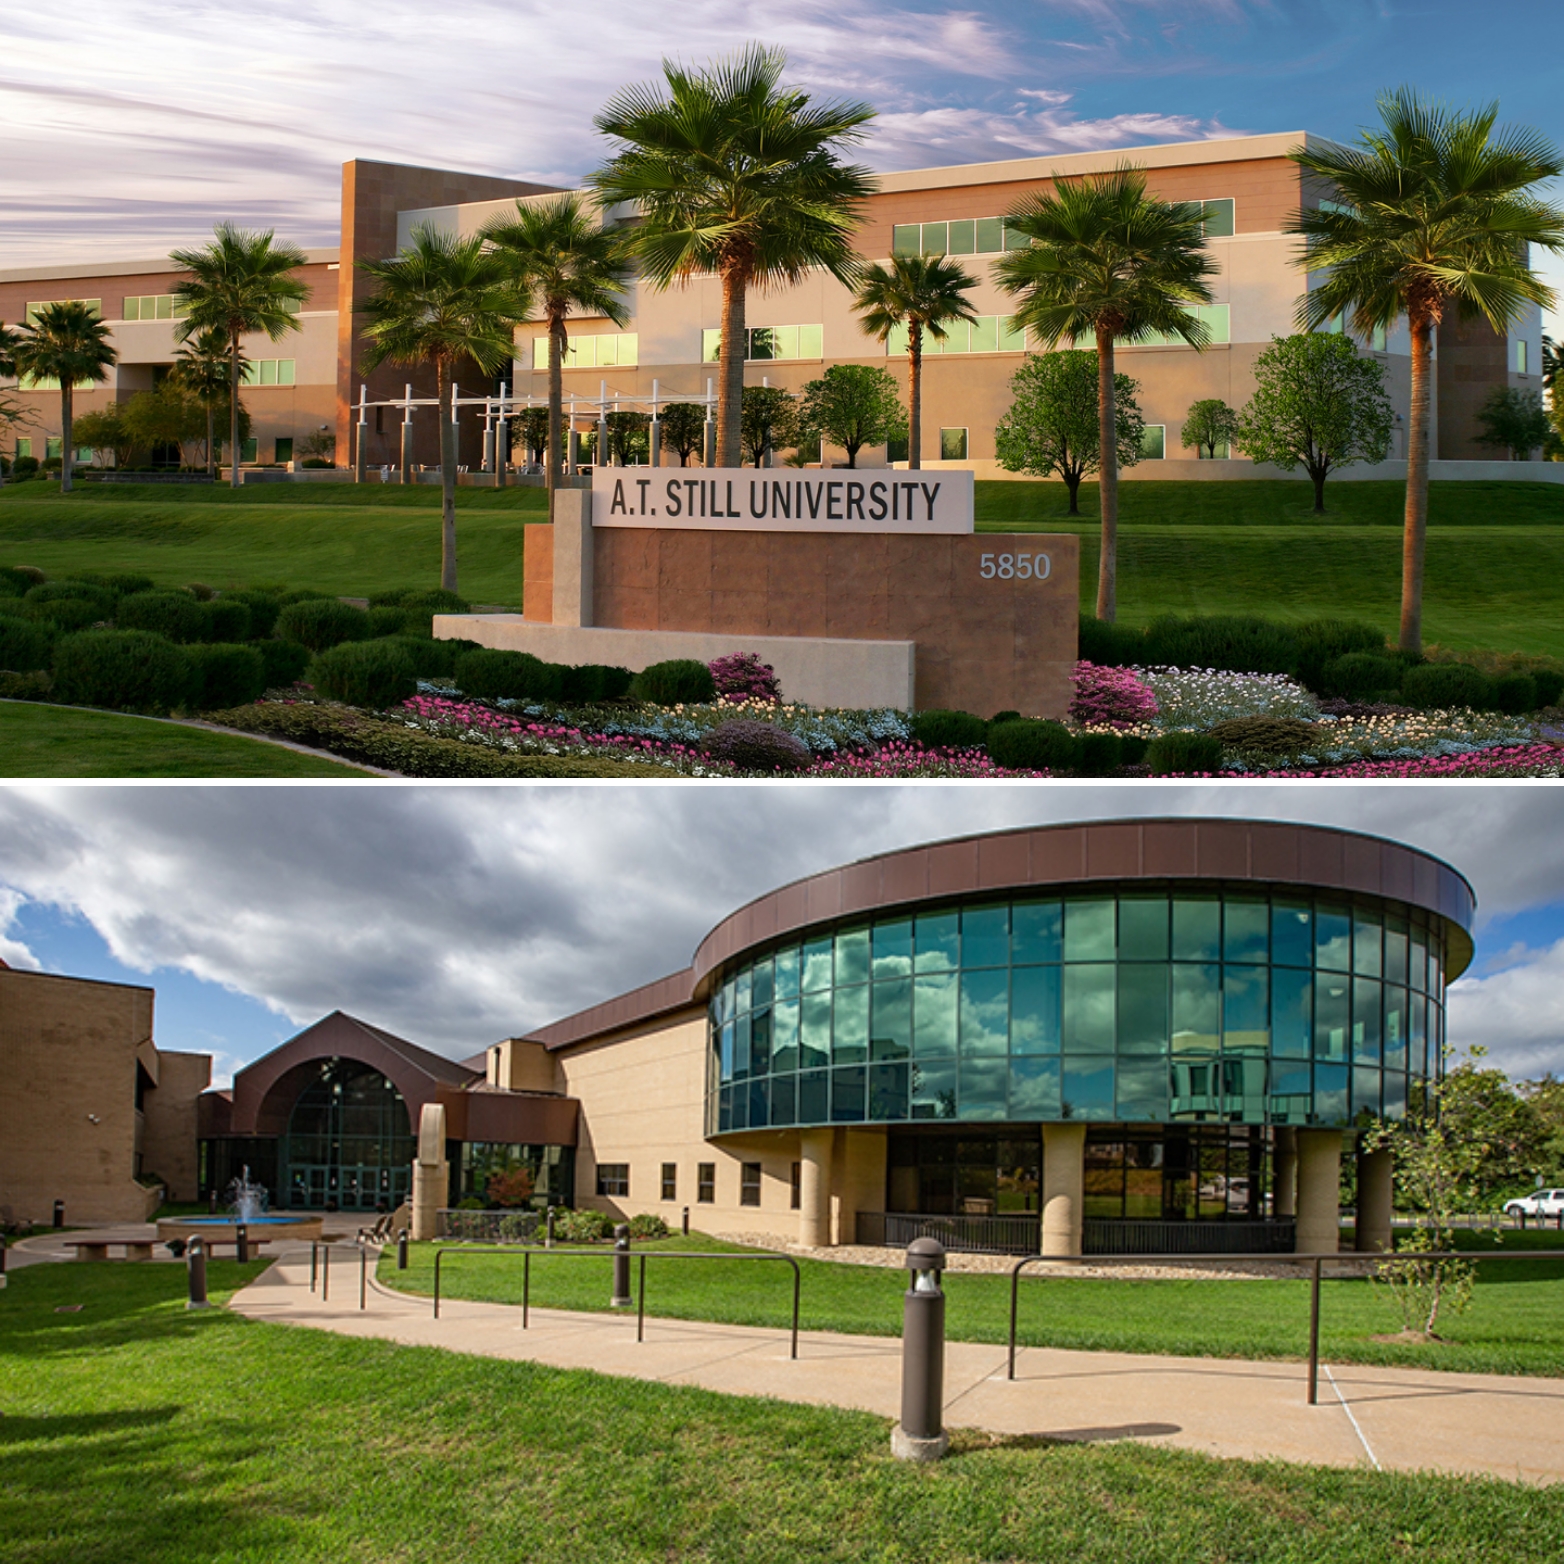 A pair of images showing ATSU's campuses in Arizona and Kirksville. Palm trees are visible in front of the building in the Arizona photo.